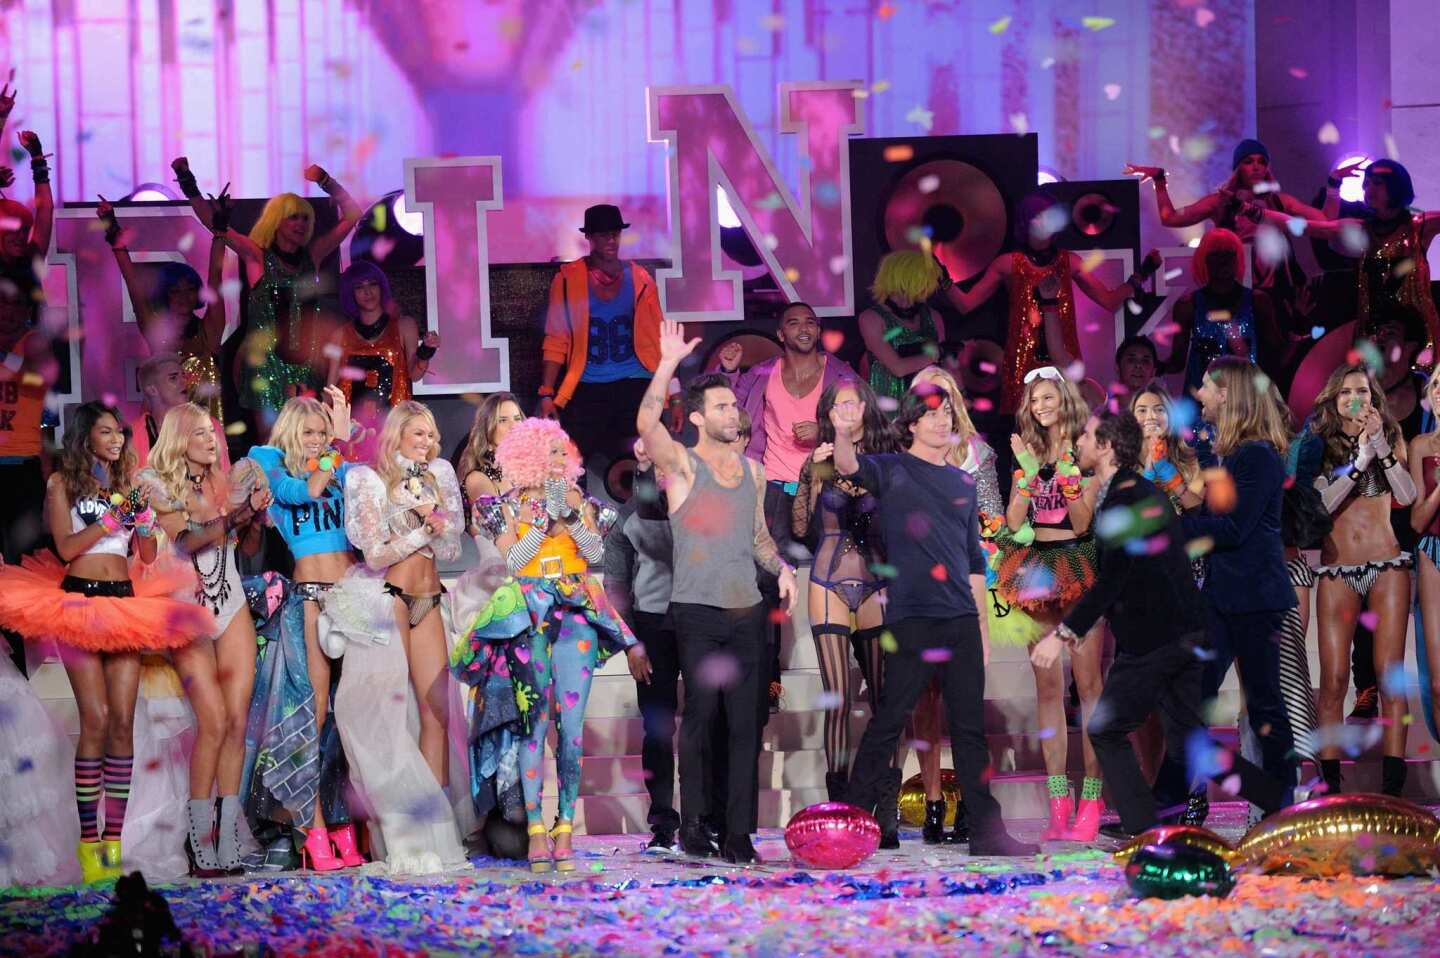 Nicki Minaj, Adam Levine and band members of Maroon 5 pose with models on the runway during the 2011 Victoria's Secret Fashion Show at the Lexington Avenue Armory in New York City. Along with Kanye West and Jay-Z, the fashion-conscious musicians performed on the runway stage.